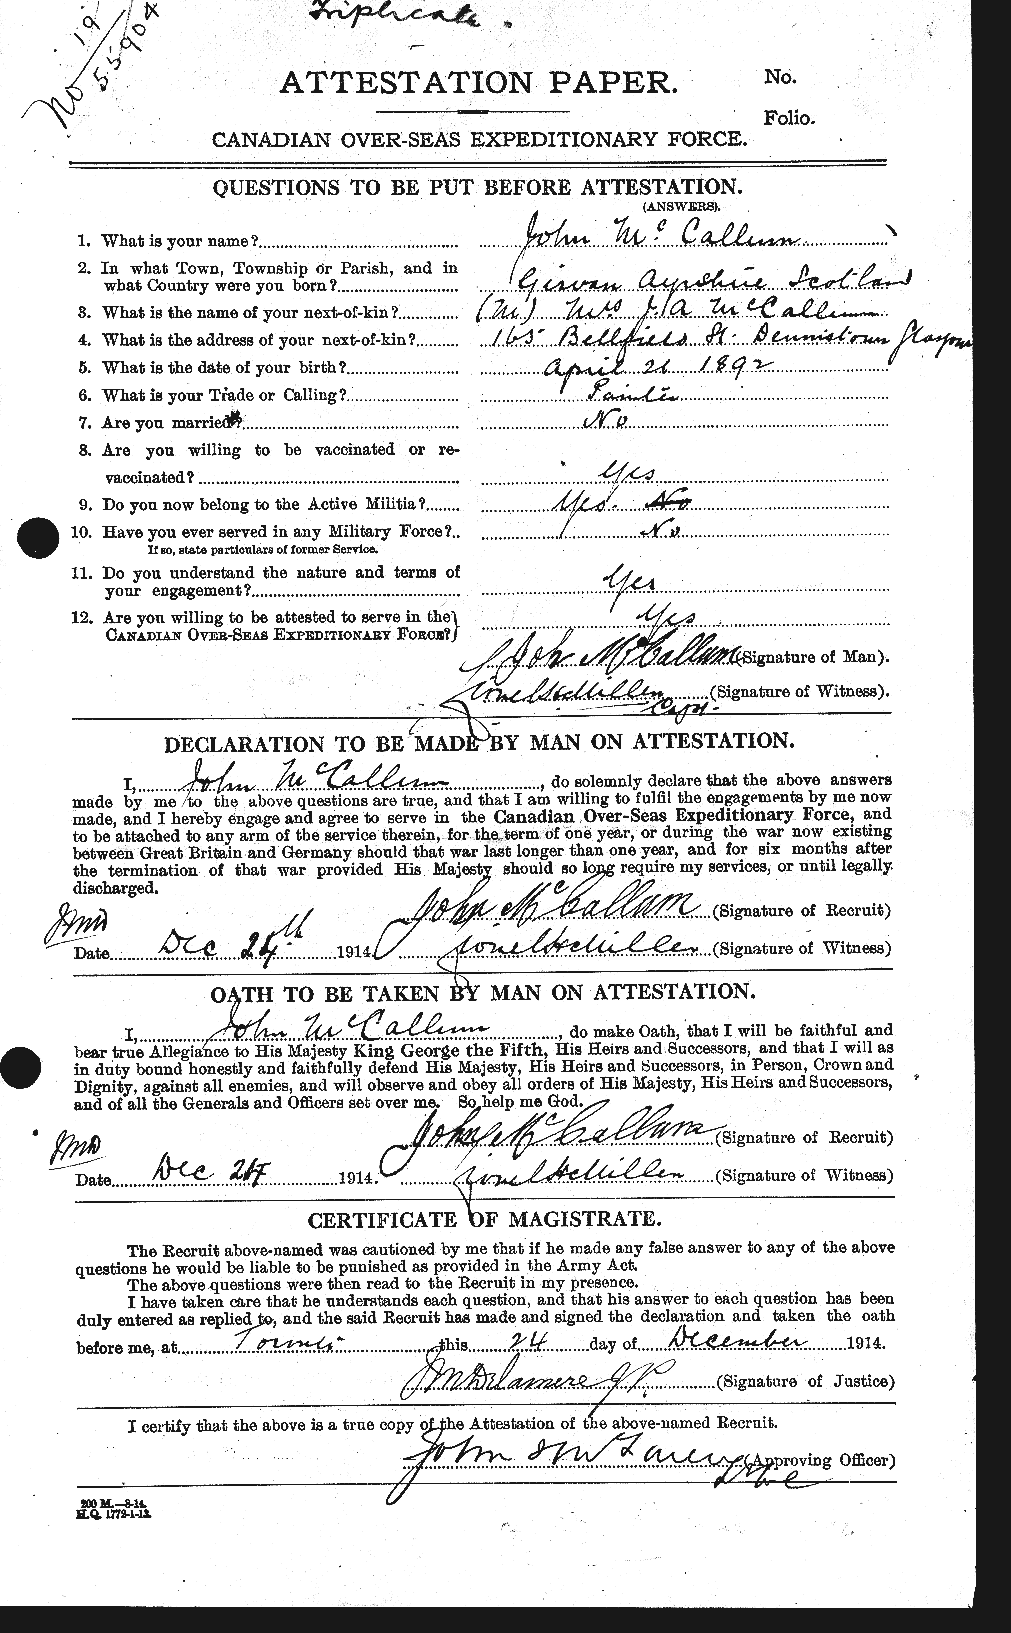 Personnel Records of the First World War - CEF 131534a